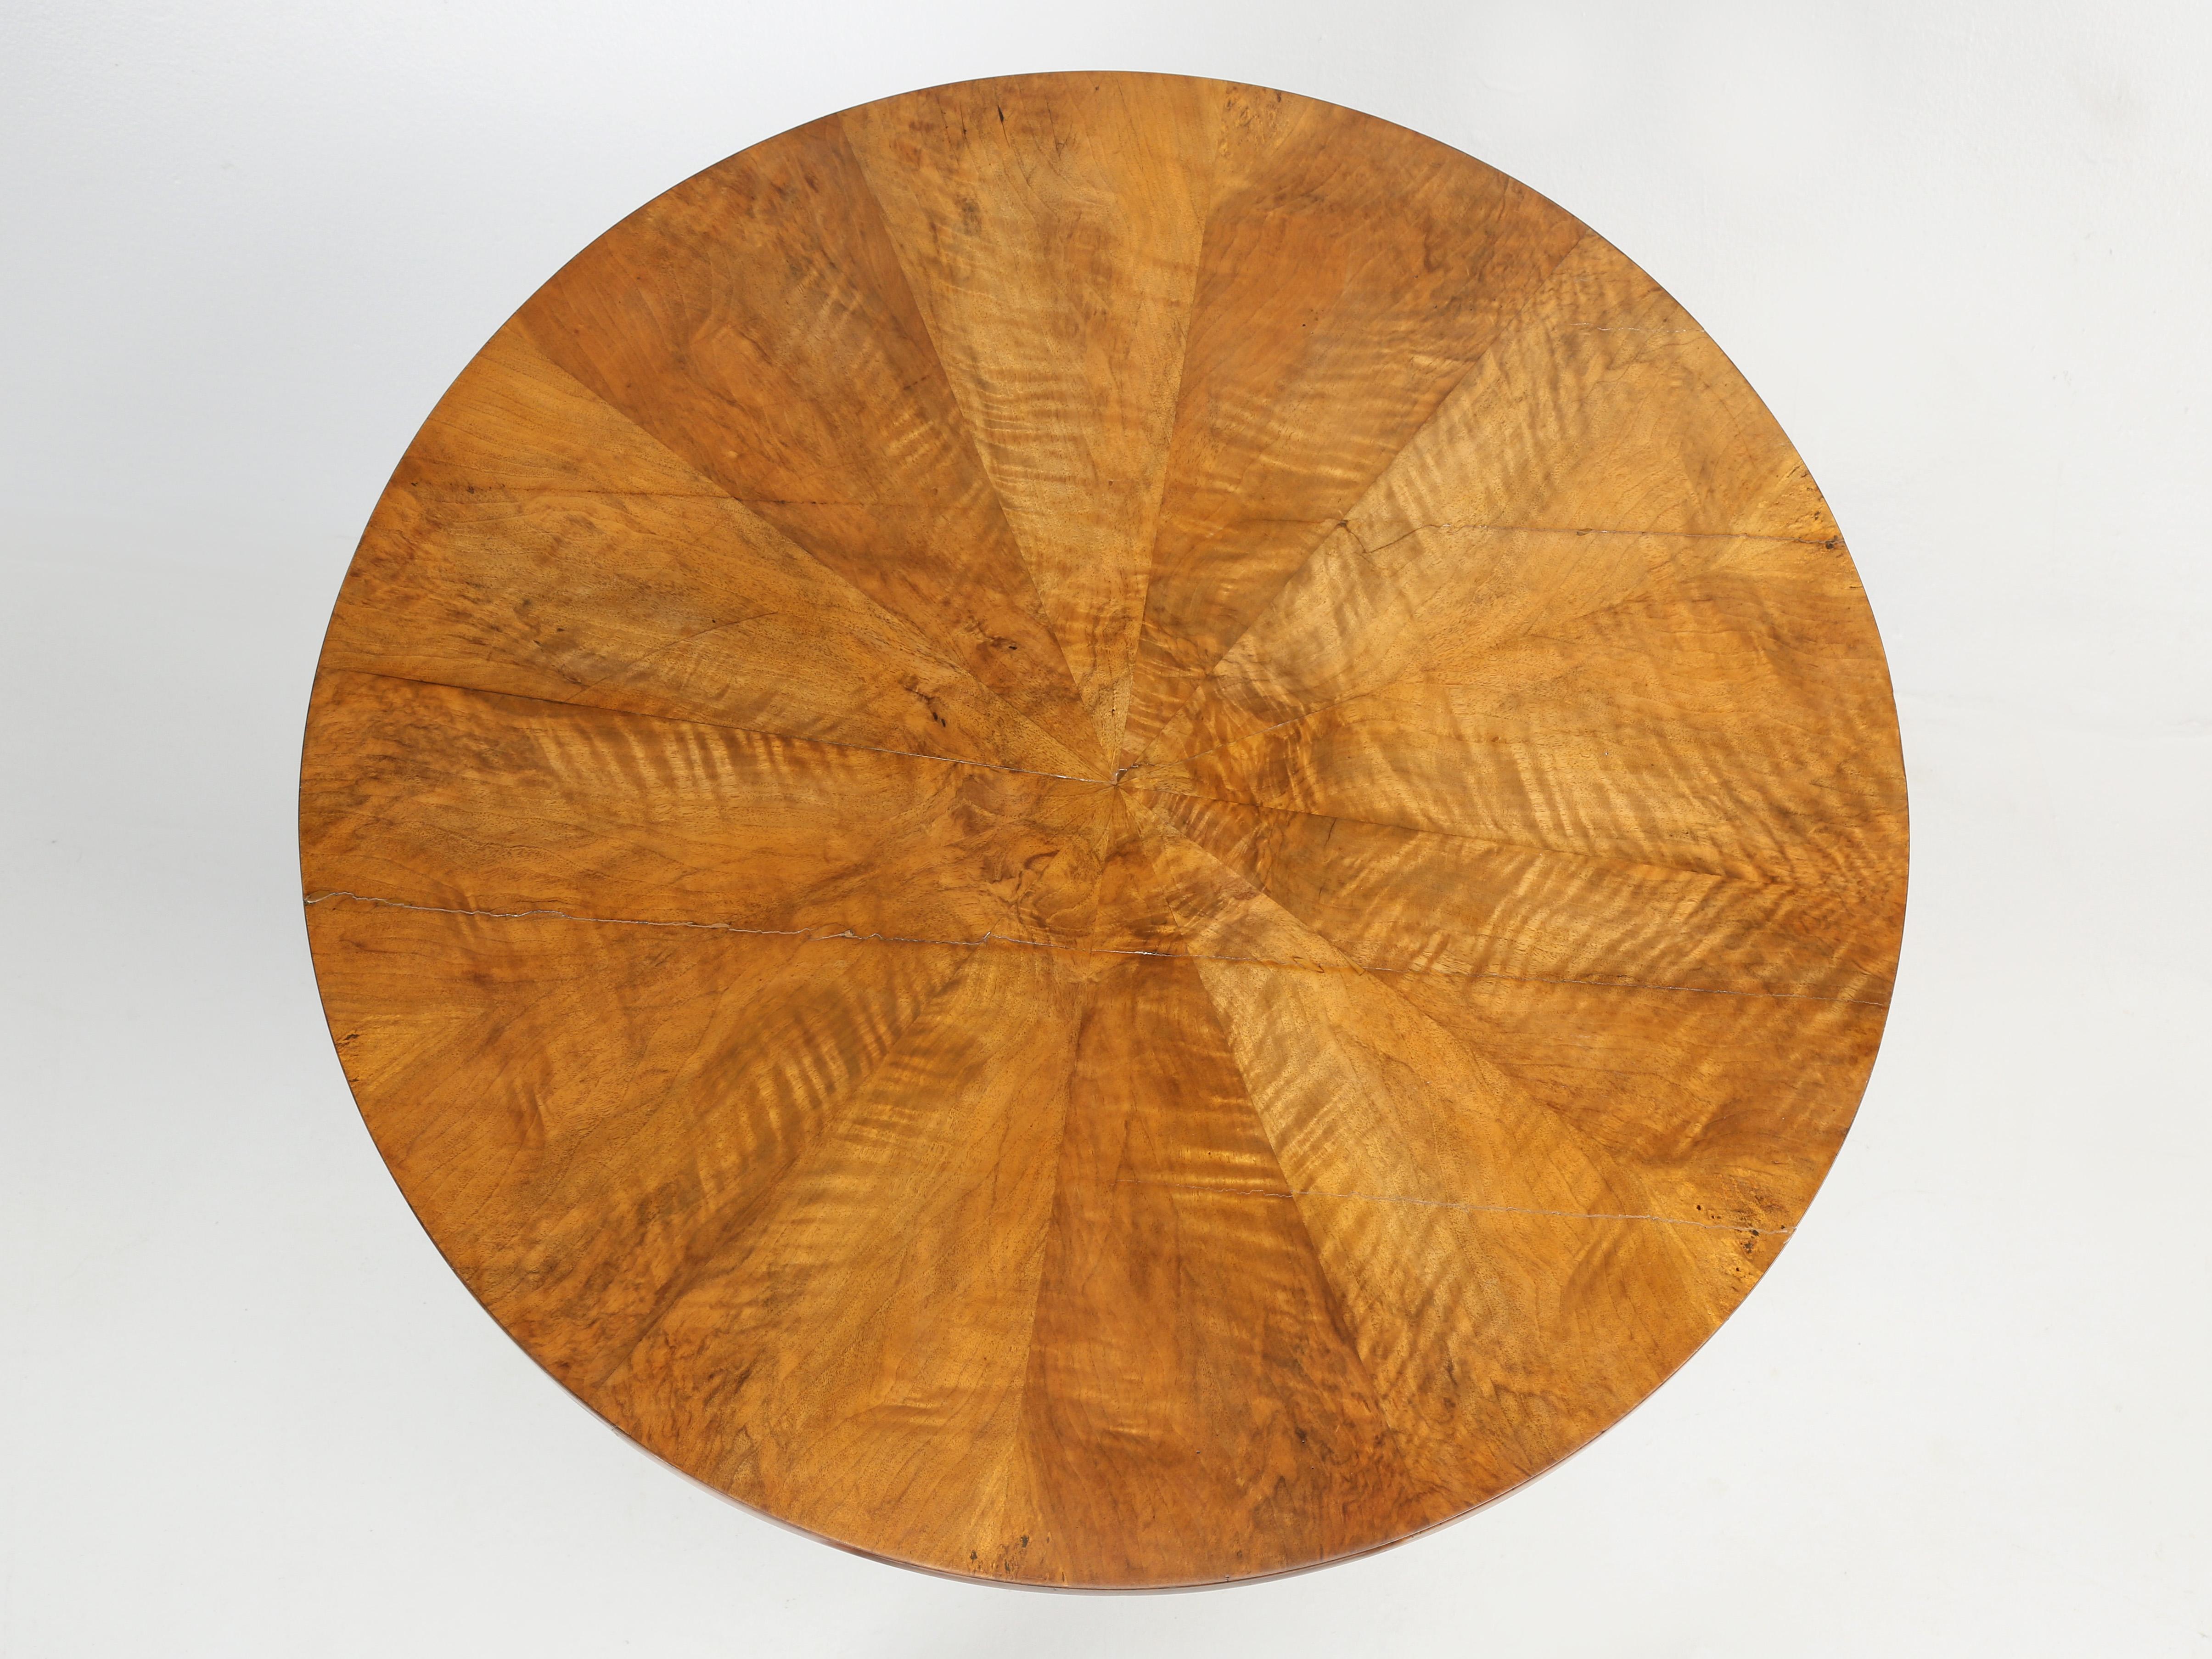 Antique French Center Hall Round Table in the style of Louis Philippe, crafted from beautiful figured French walnut in a classic sunburst pattern, with lion paw feet. We received our French round center hall table pretty much in the condition you